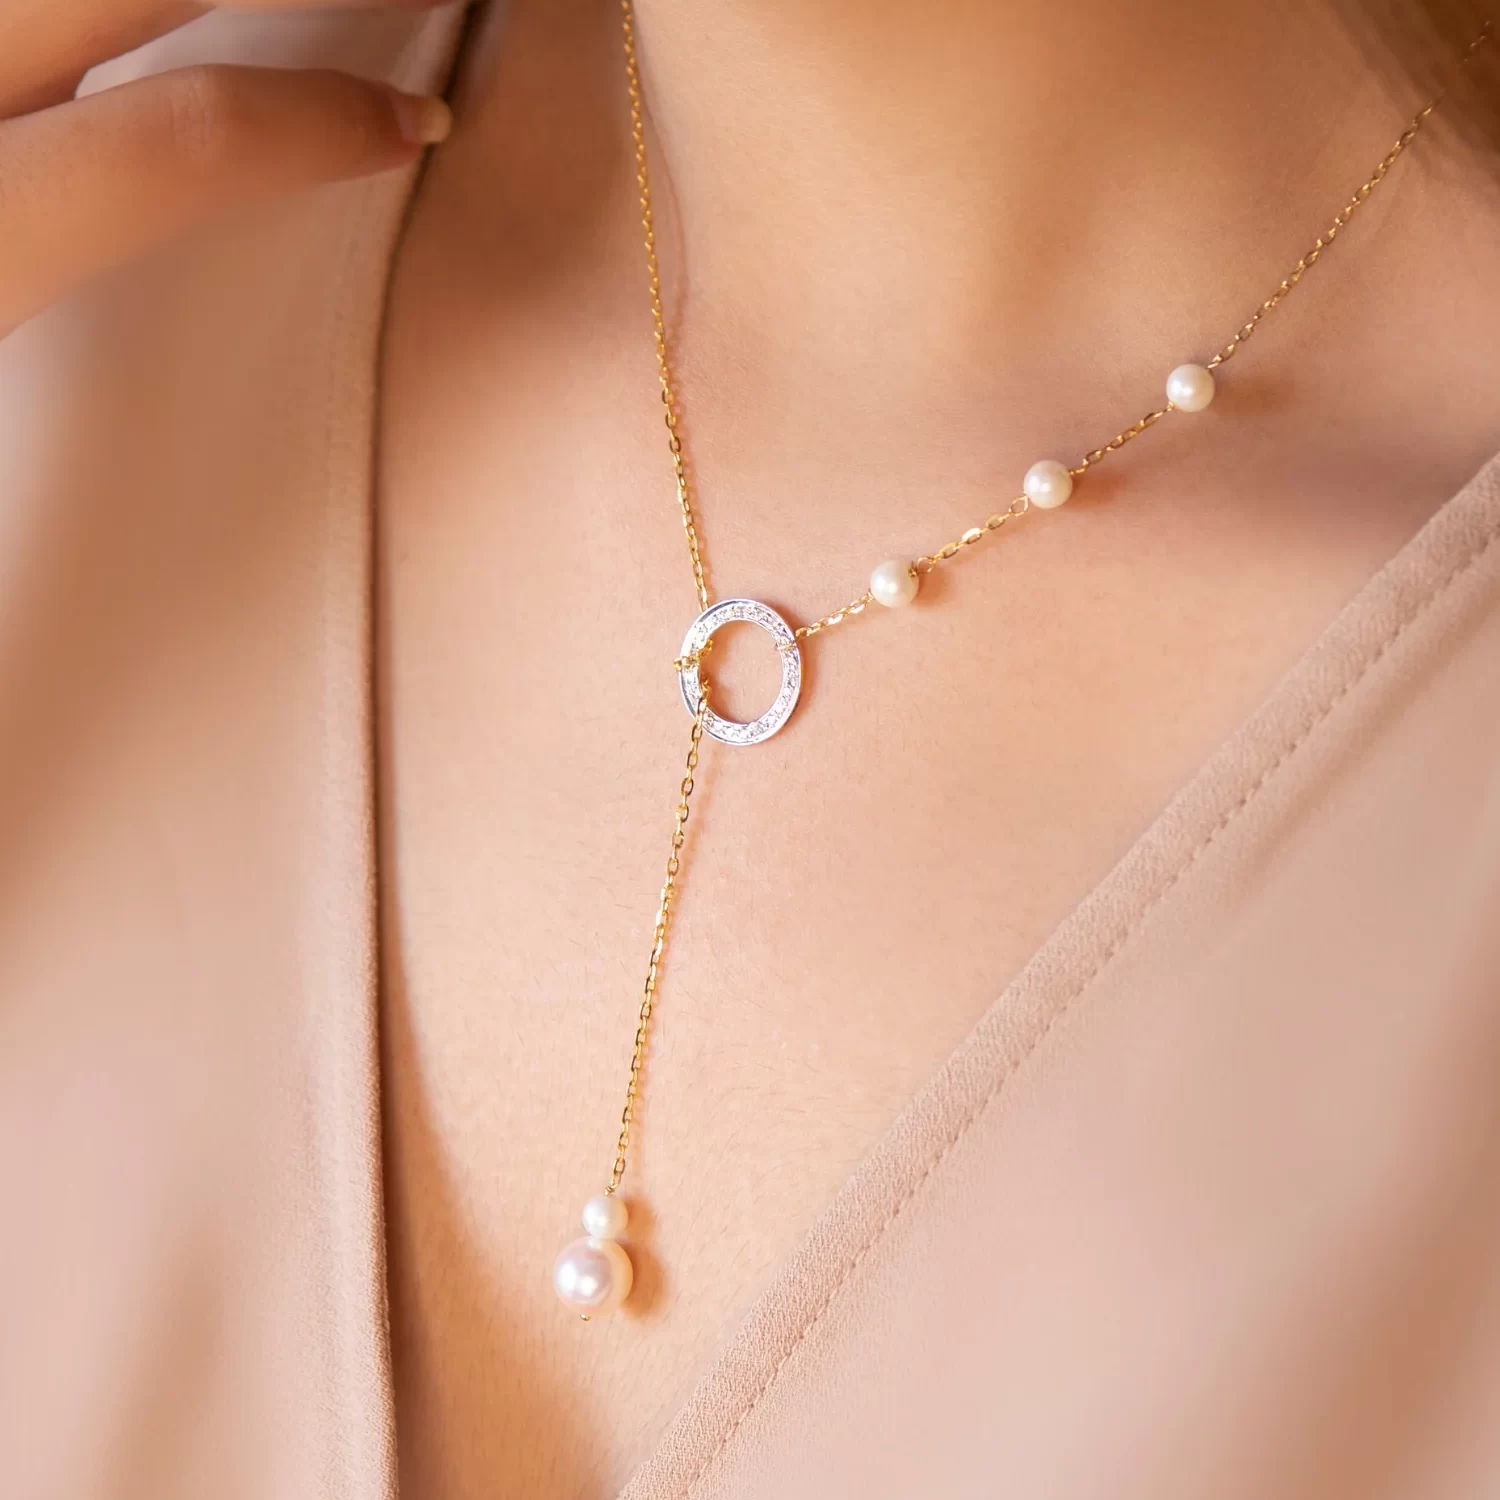 pearl circle lariat necklace on a woman's neck